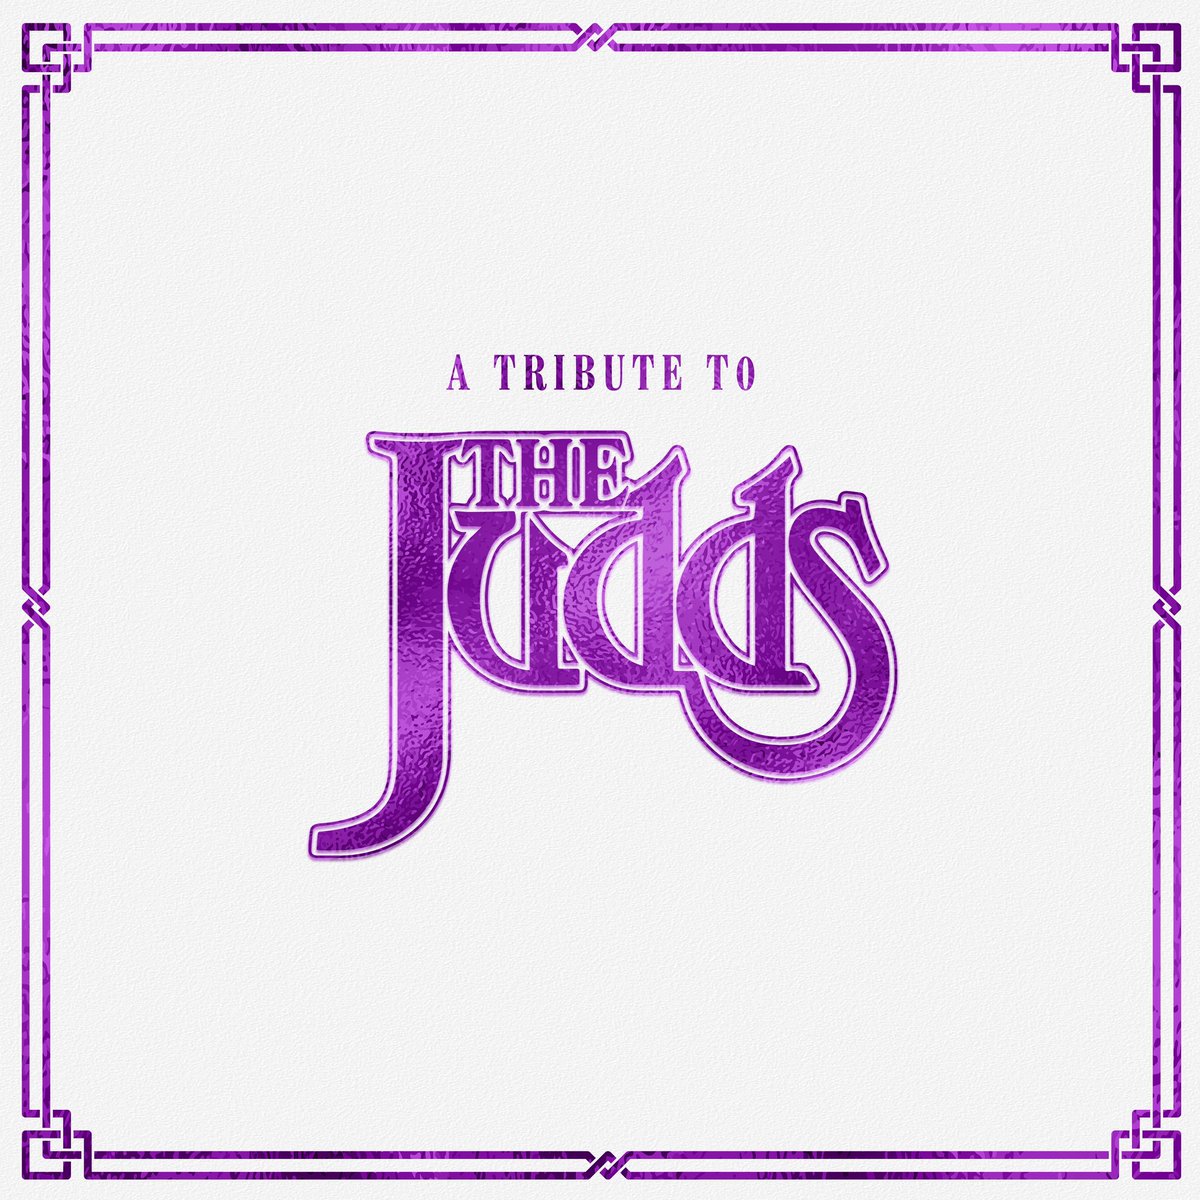 “To have all these artists, most of which are my friends, come together & lend their voices & artistry to reimagine these songs, is so special. These songs are timeless & I am so excited for them to live on for generations to come.' -@Wynonna A Tribute to The Judds, out 10/27 💜